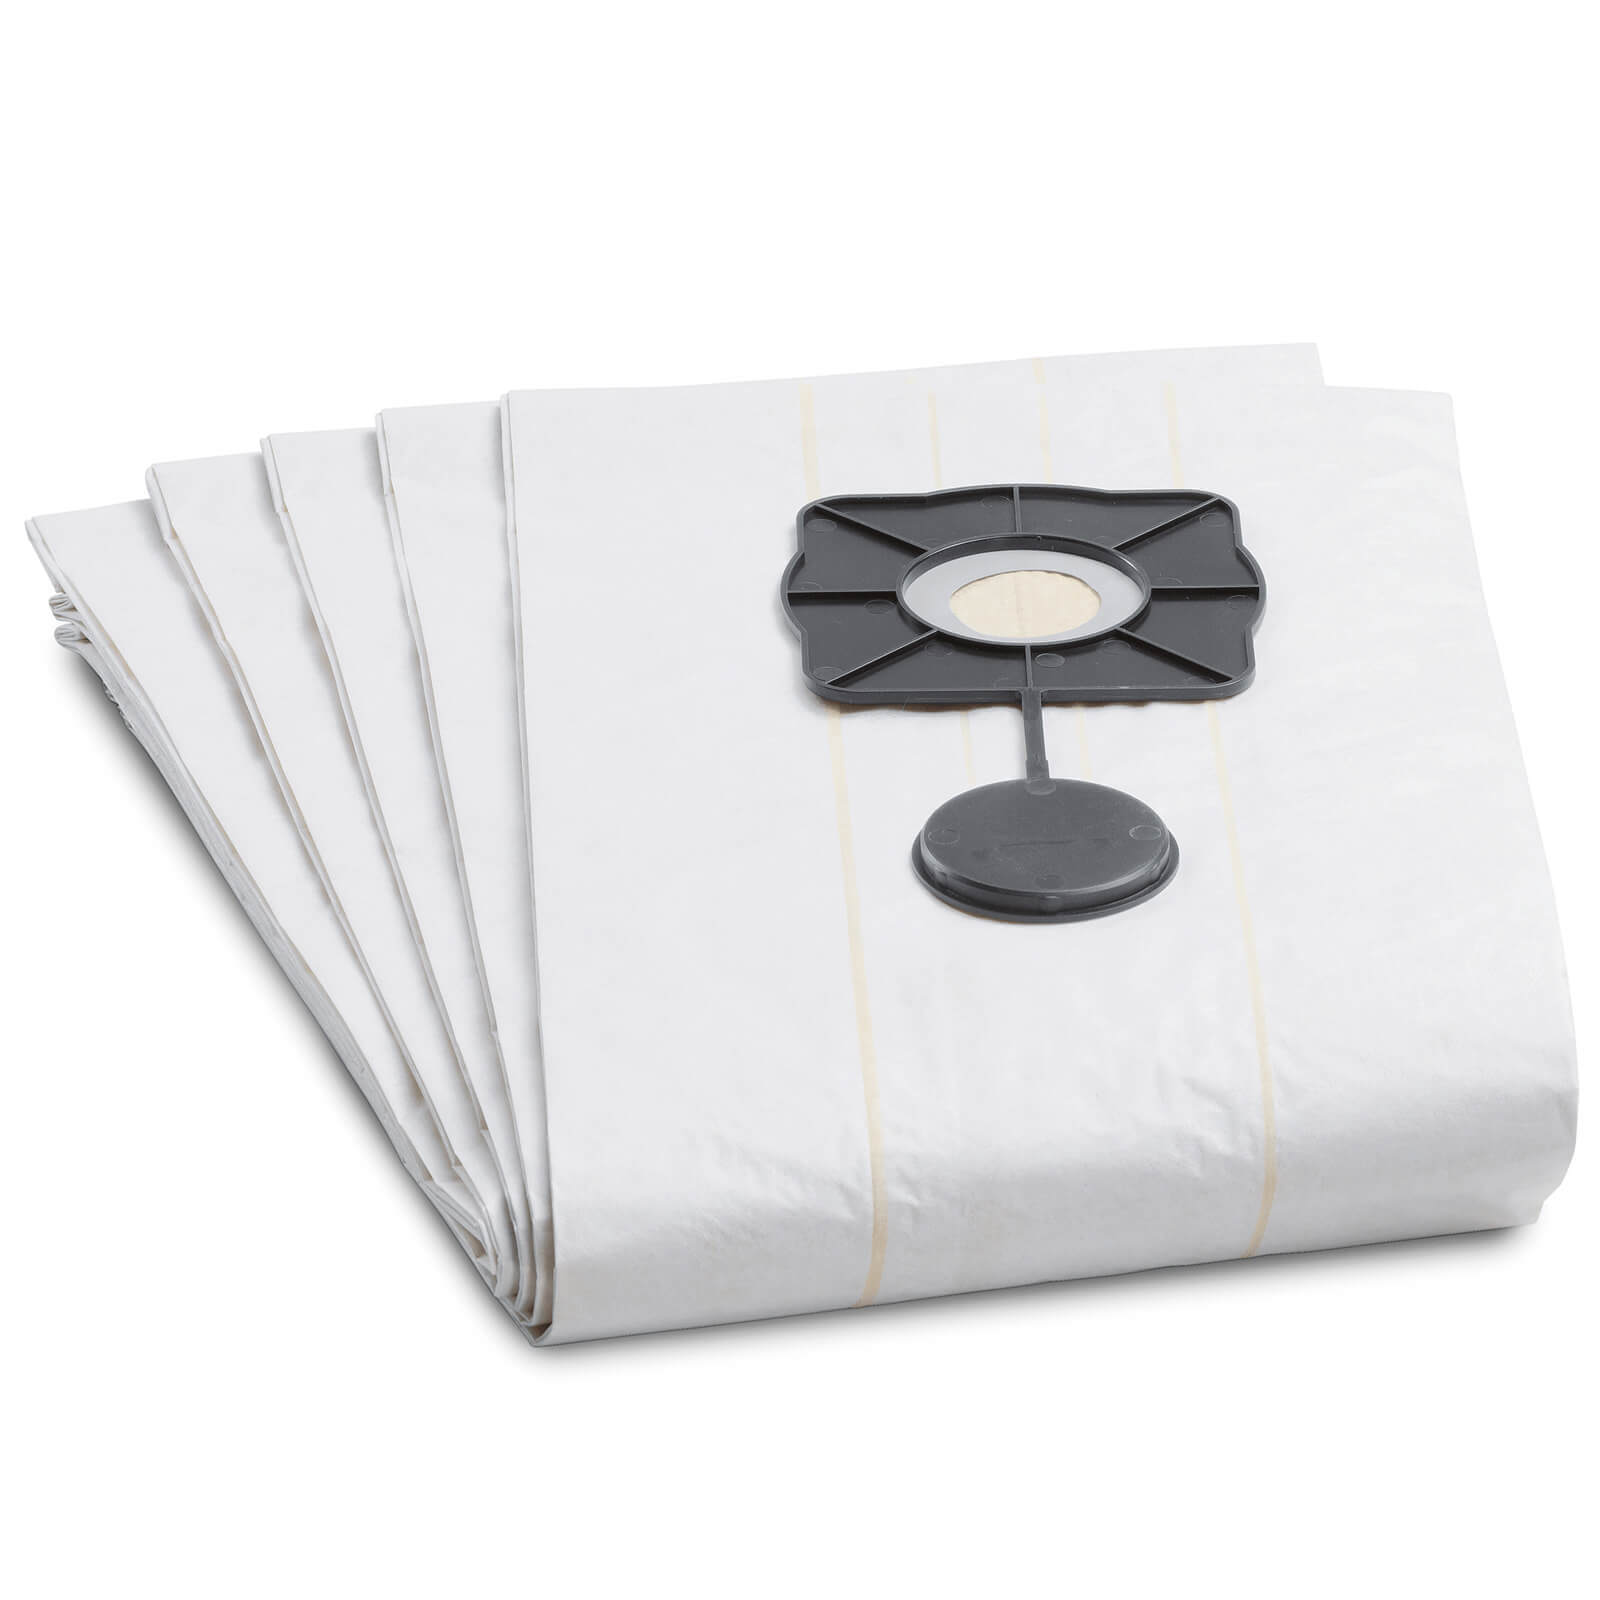 Image of Karcher Class L Wet Filter Dust Bags for NT 45/1 and NT 48/1 Vacuum Cleaners Pack of 5